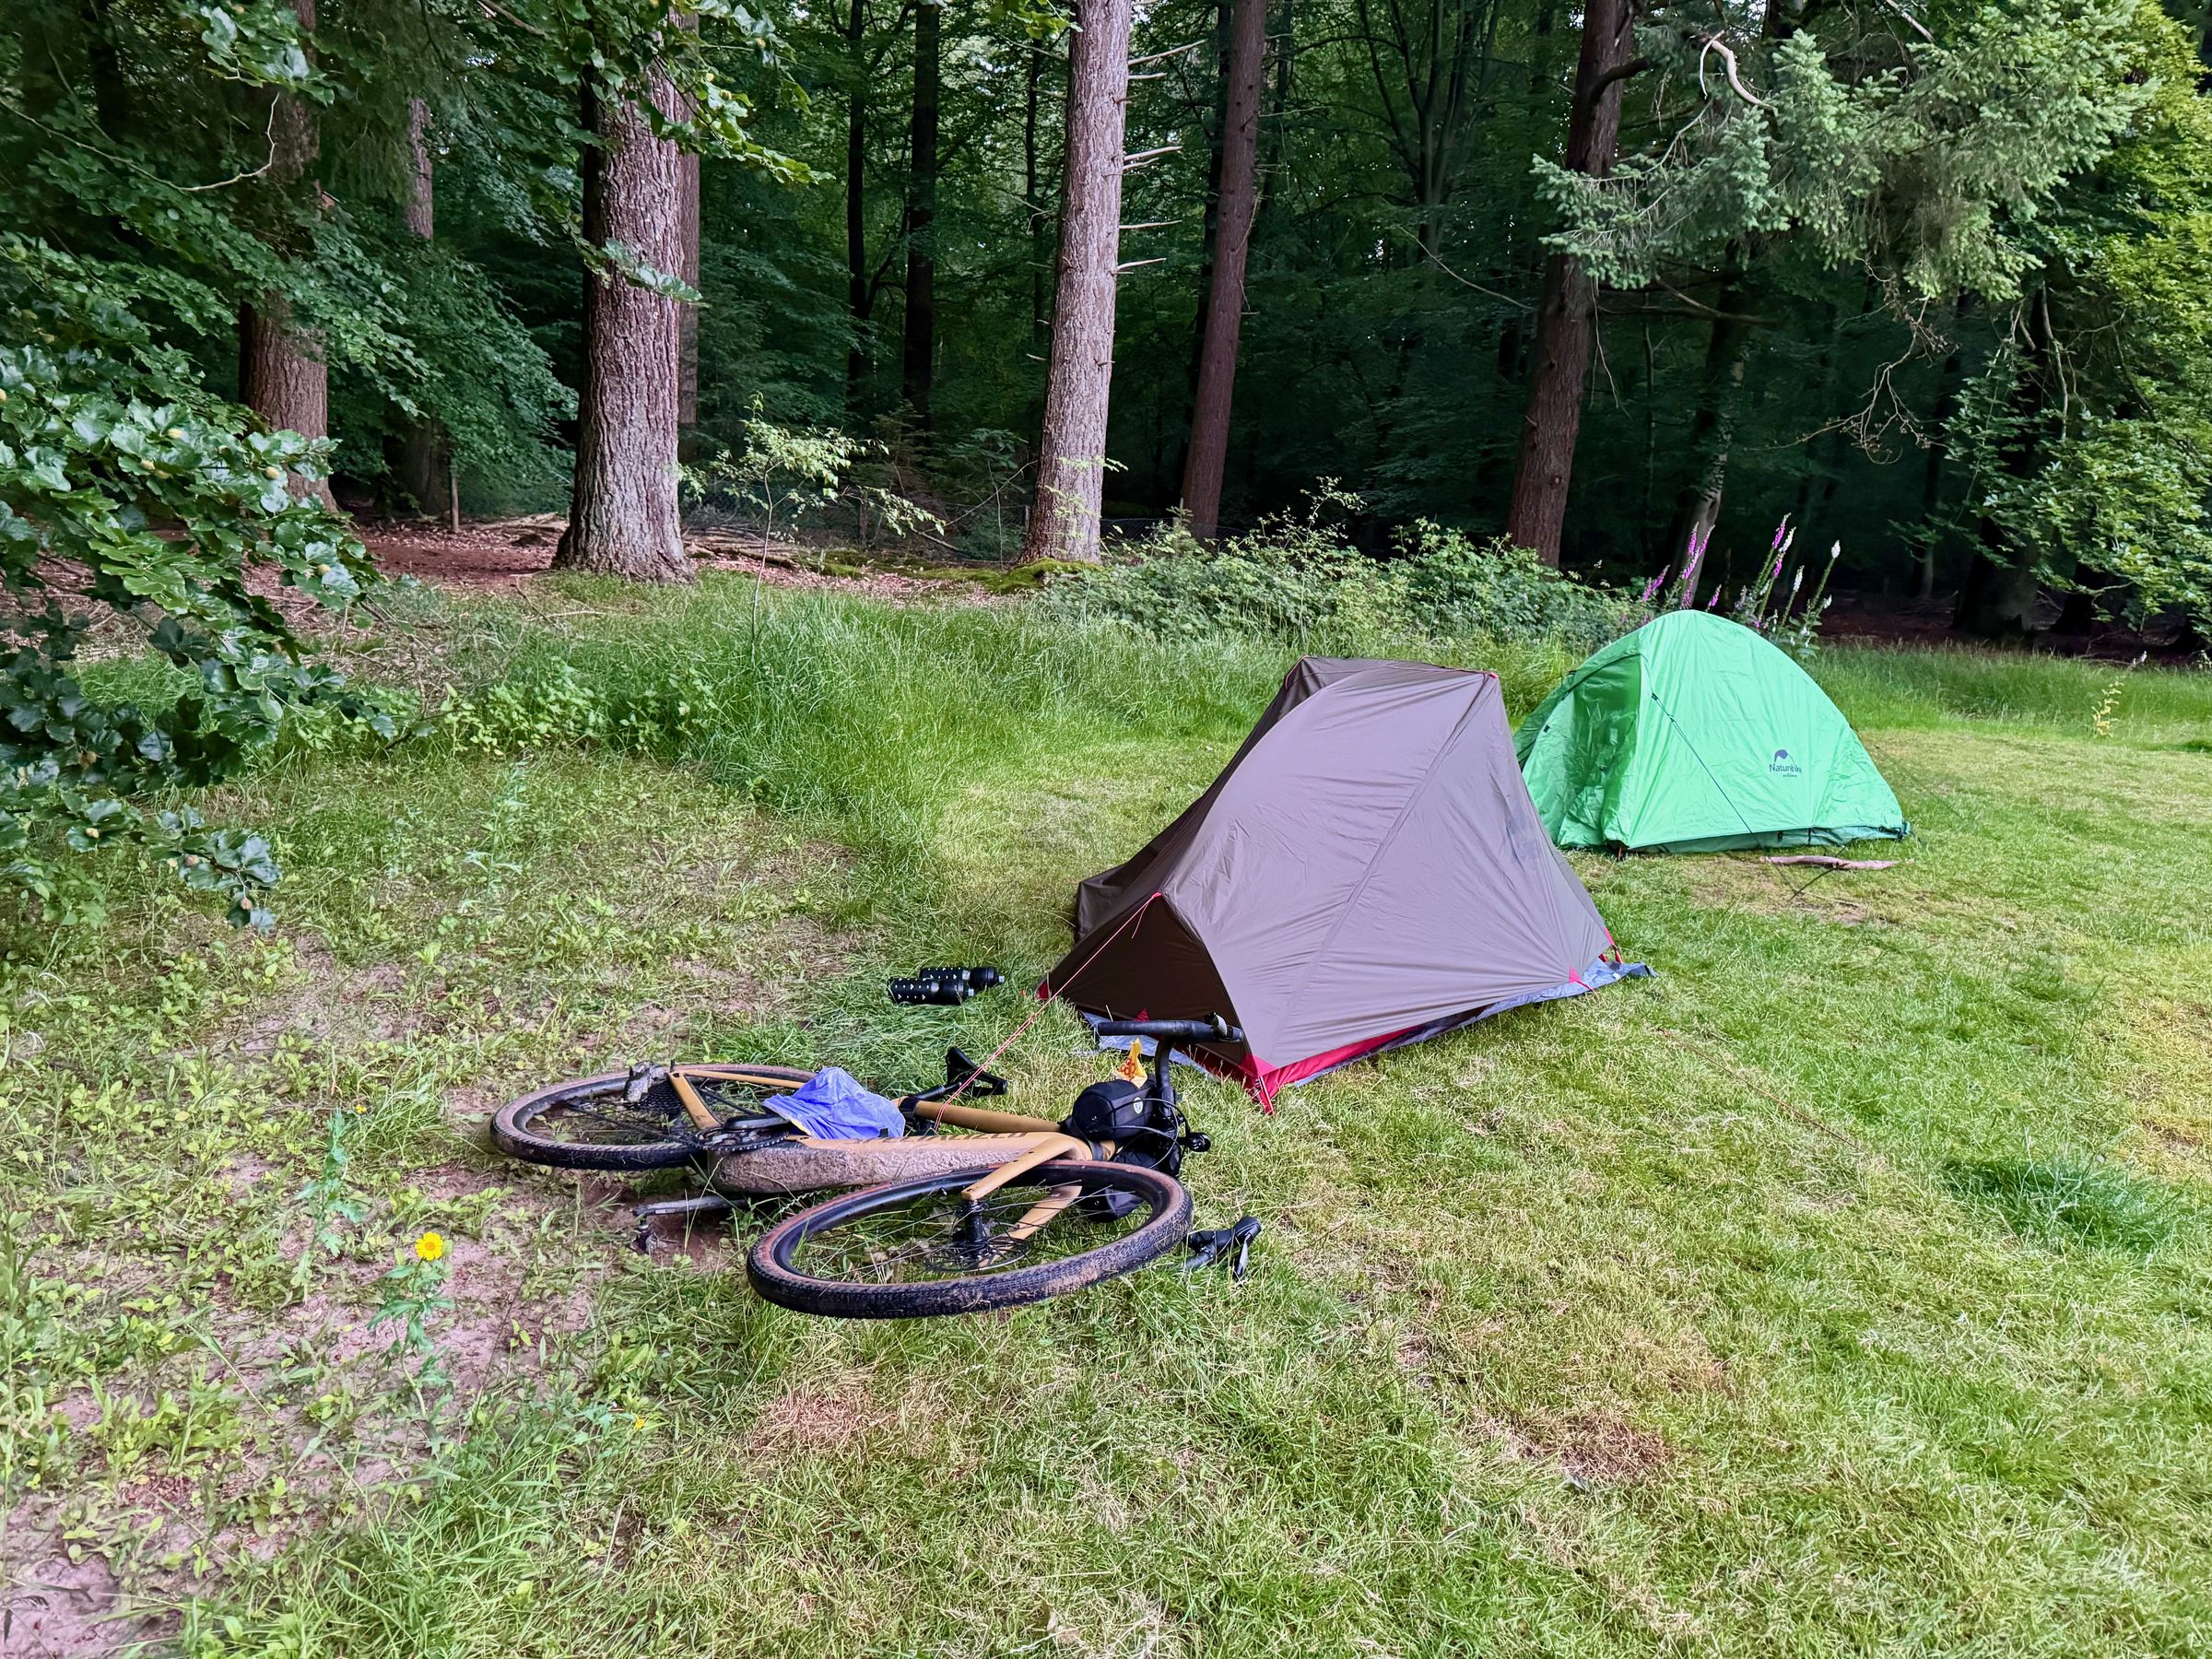 <em>Pro tip: Stake your tent lines through your bike and when someone tries to steal it your collapsing tent will alert you, assuming you can still get out.</em>